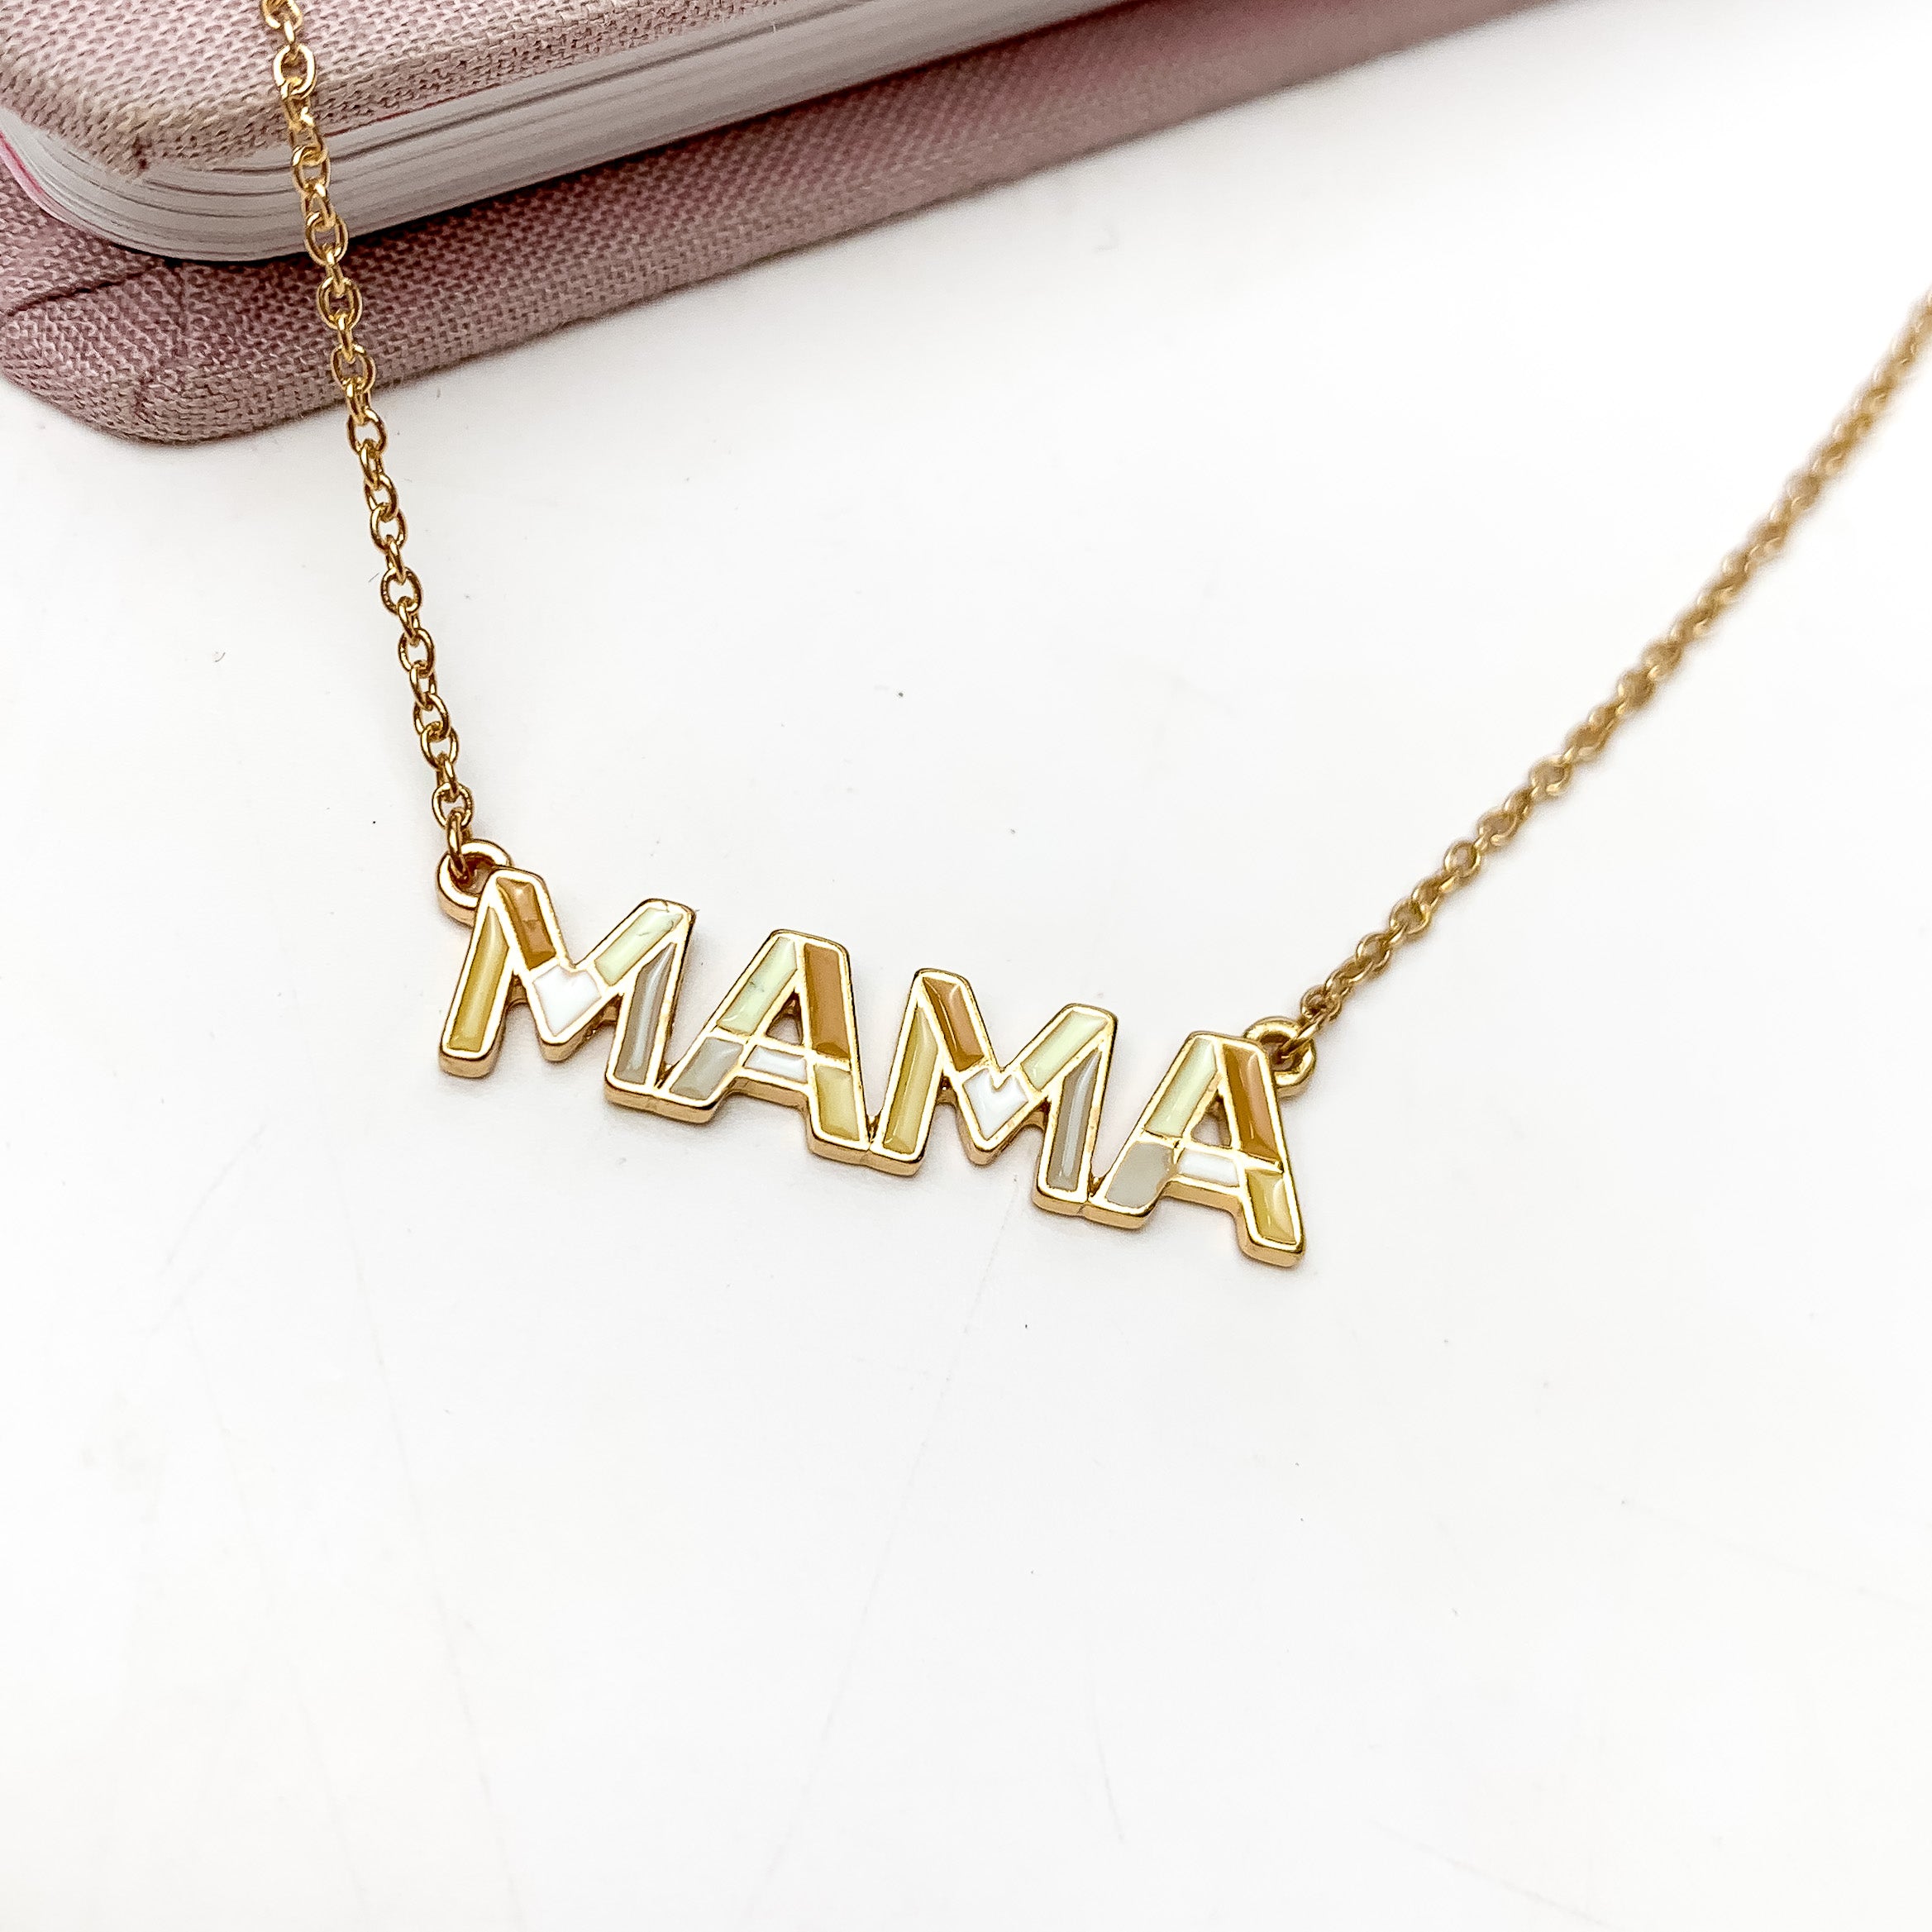 Mama Chain Necklace in Gold Tone With Brown Tones - Giddy Up Glamour Boutique